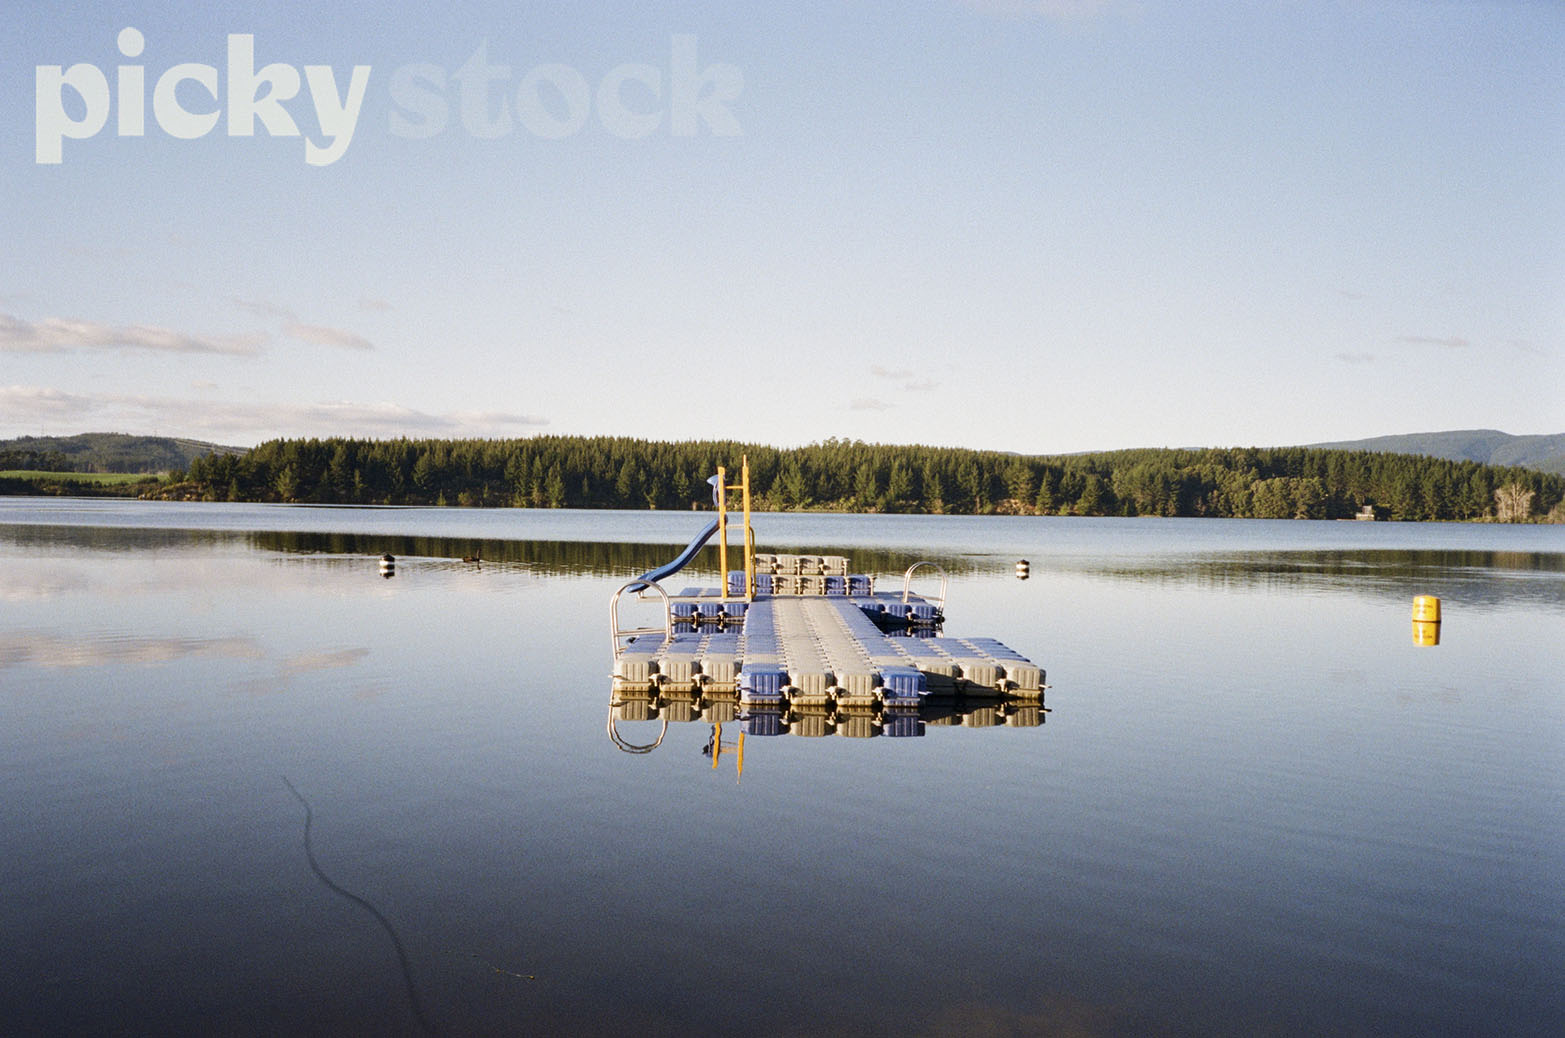 Floating pontoon in middle of river. Yellow ladder with blue slide attached. Ocean is calm, and a soft blue. Sky has a few scattered clouds, with green trees and bush at the other end of the lake. 